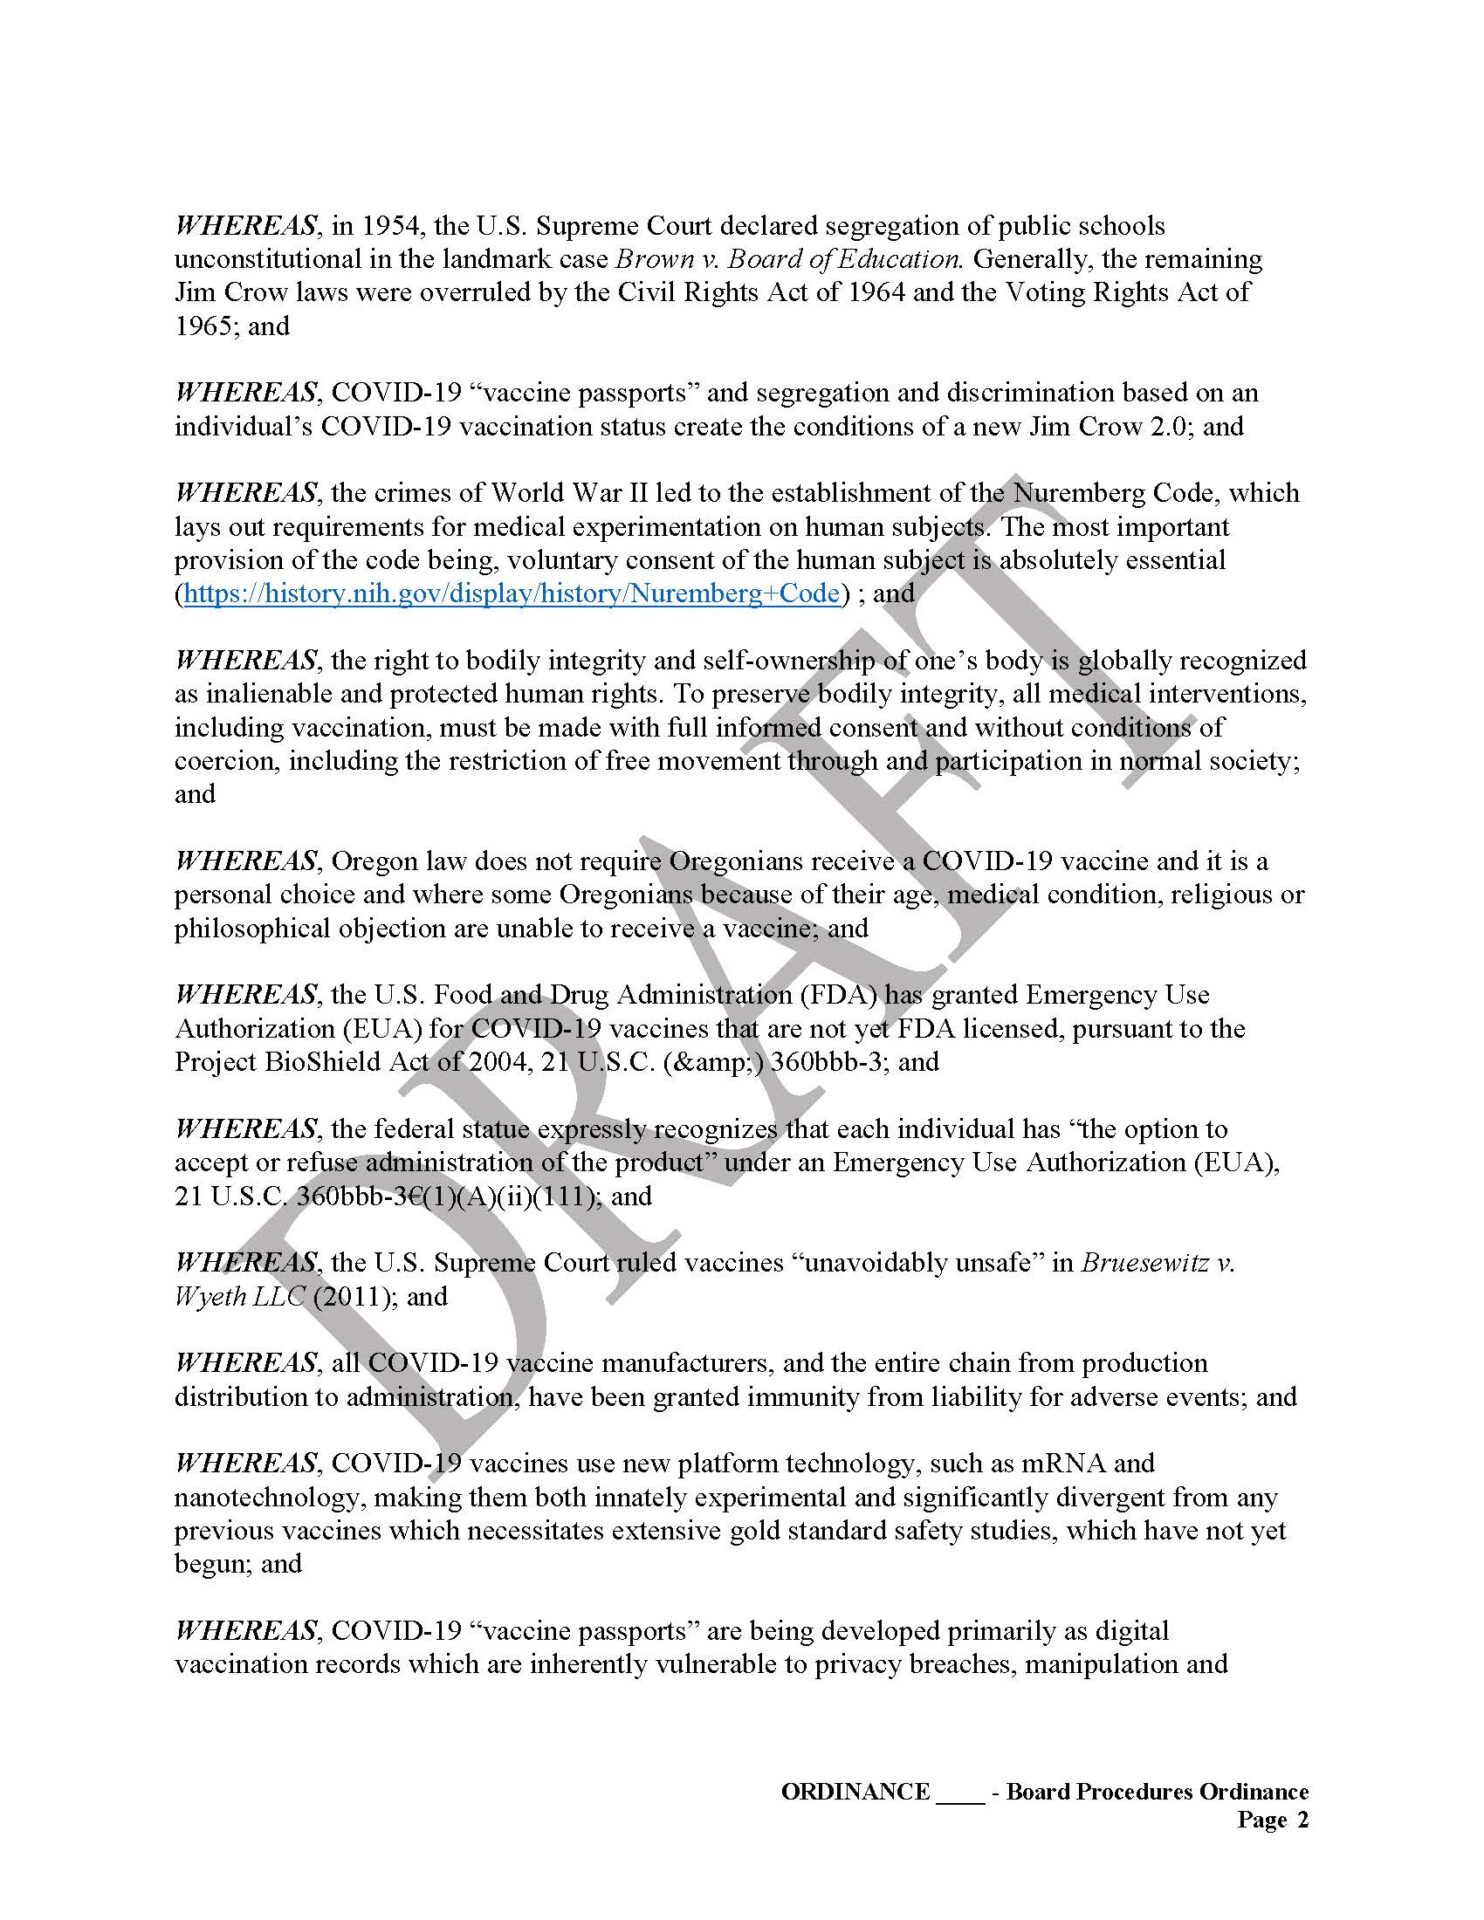 Yamhill County, OR Vaccine Passport Sanctuary Draft Page 2